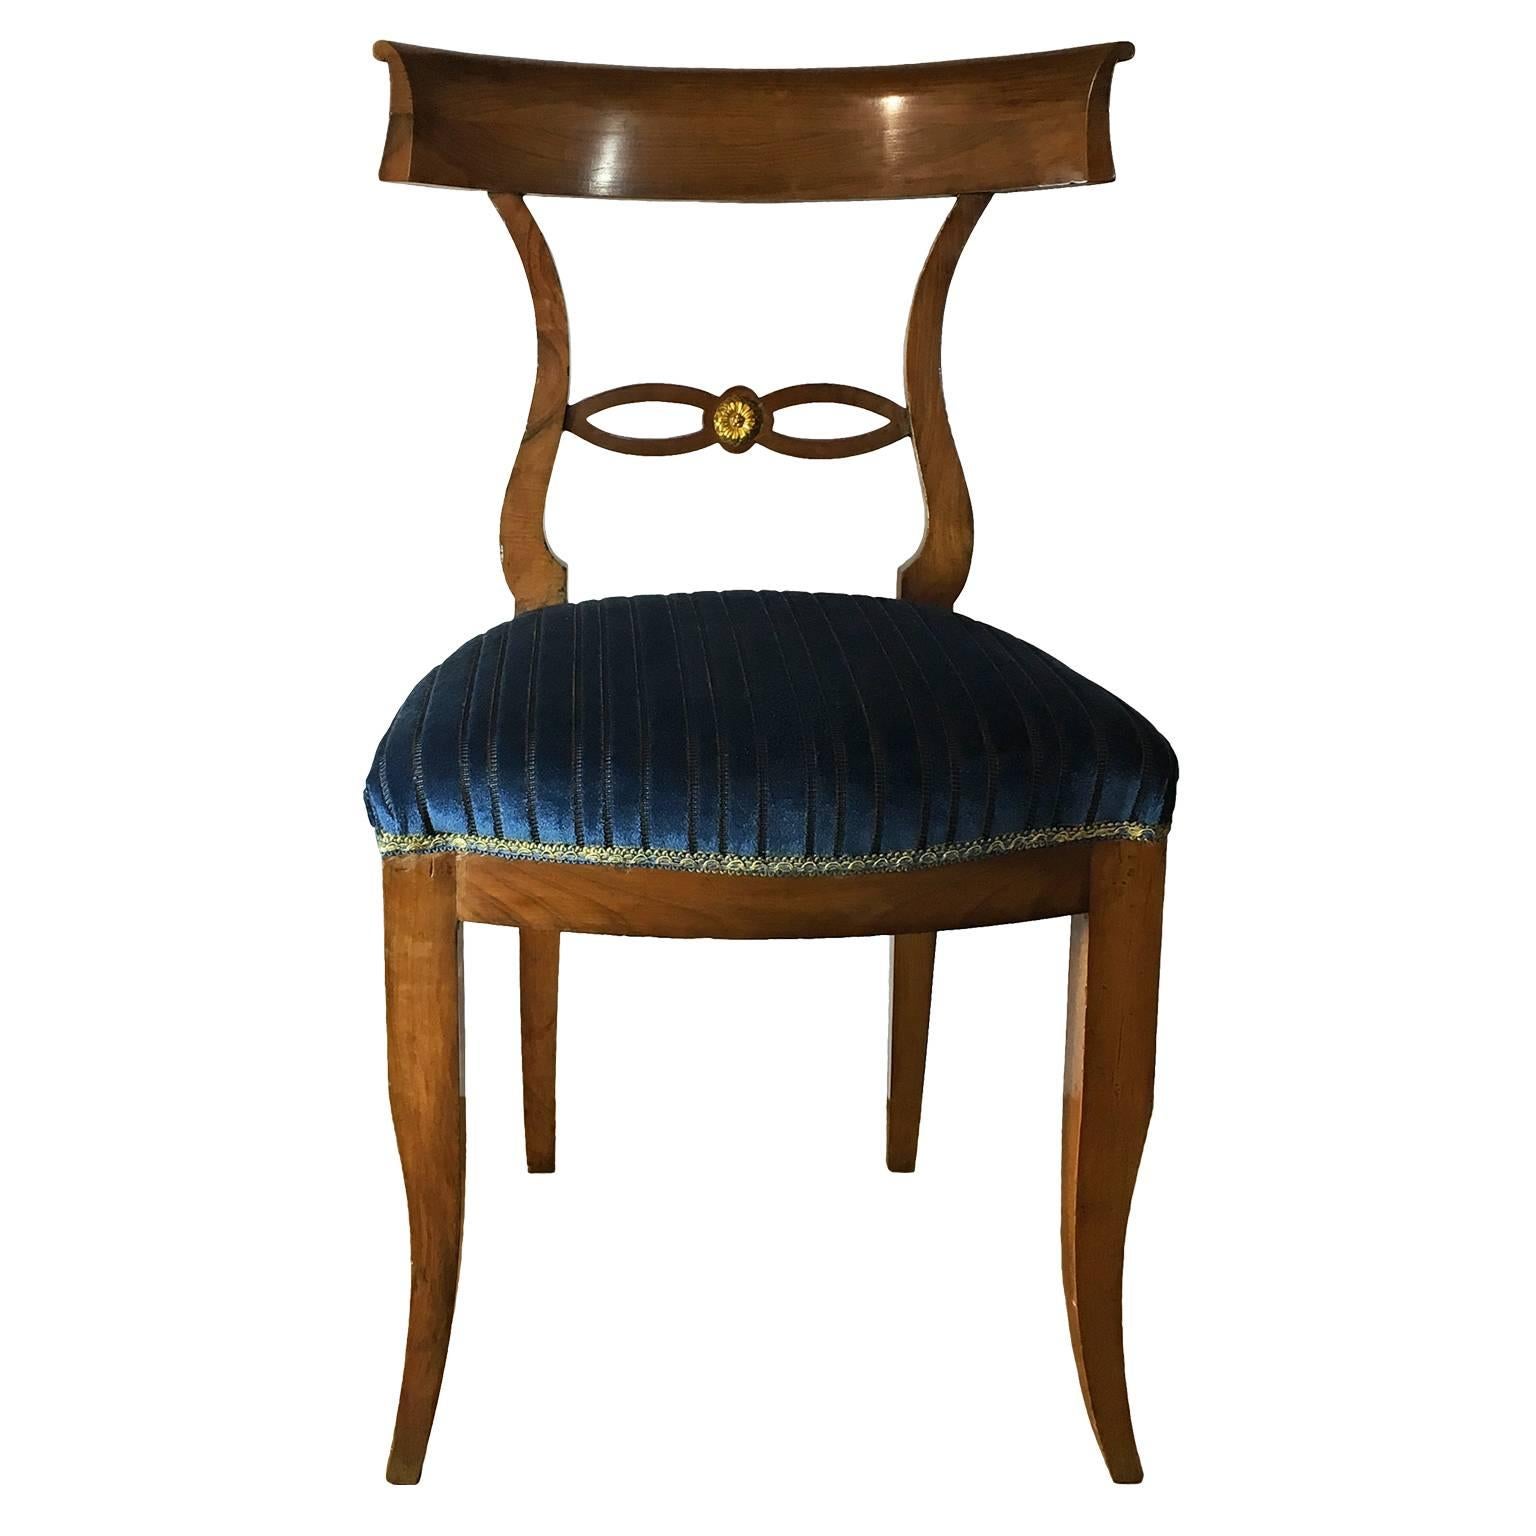 An elegant set of six Italian directory style chairs in solid walnut wood. The chairs present a beautiful Silhouette with elegant lines, a loop with ormolu detail underneath the curved back and slightly curved legs. Newly reupholstered in a striped